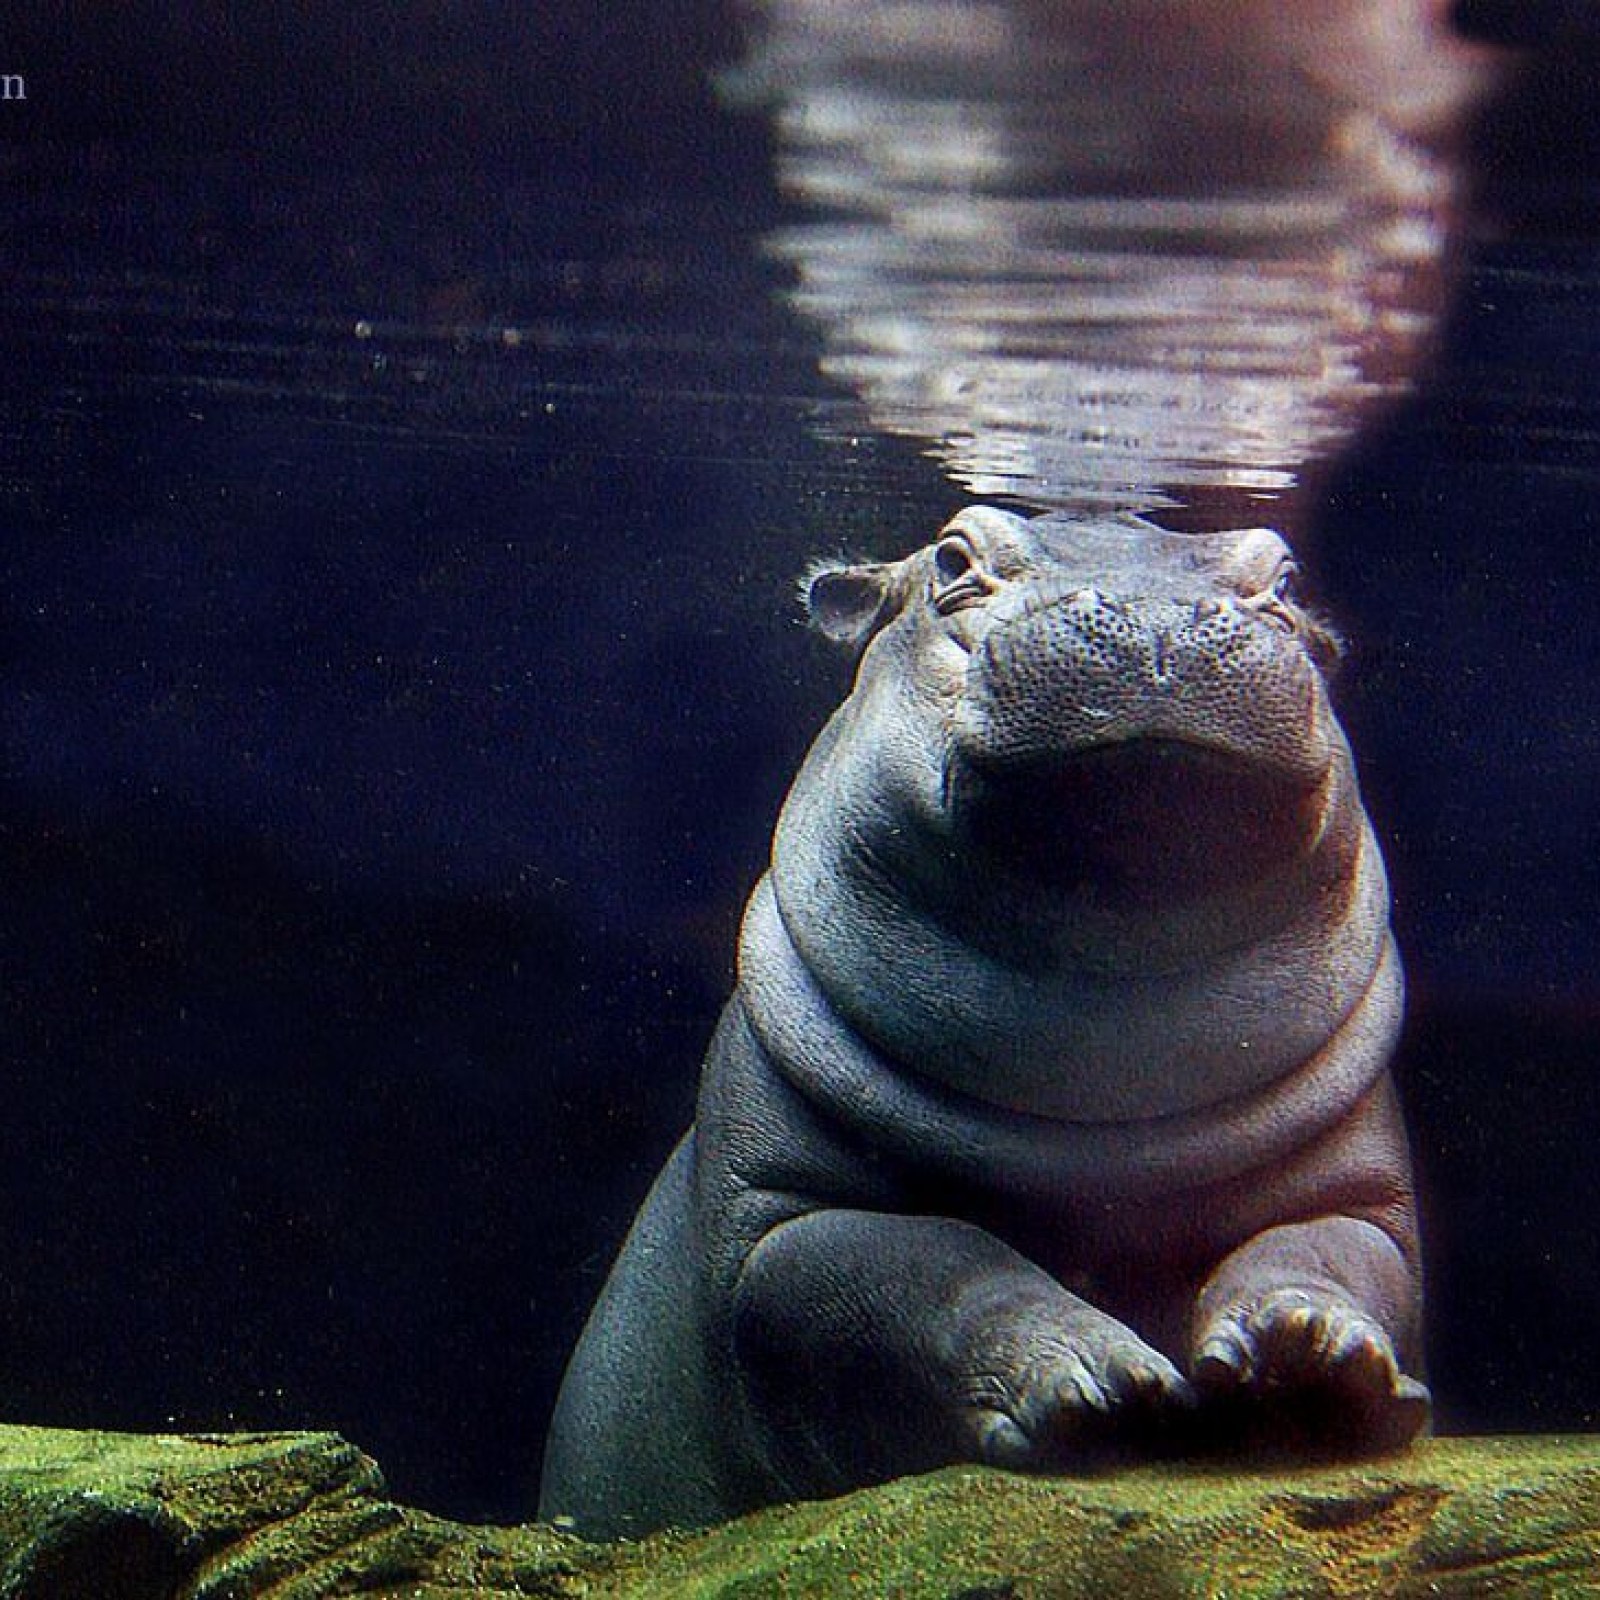 Fiona The Hippo Birthday Cincinnati Zoo Celebrity Sparked New Brand Of Tourism In City